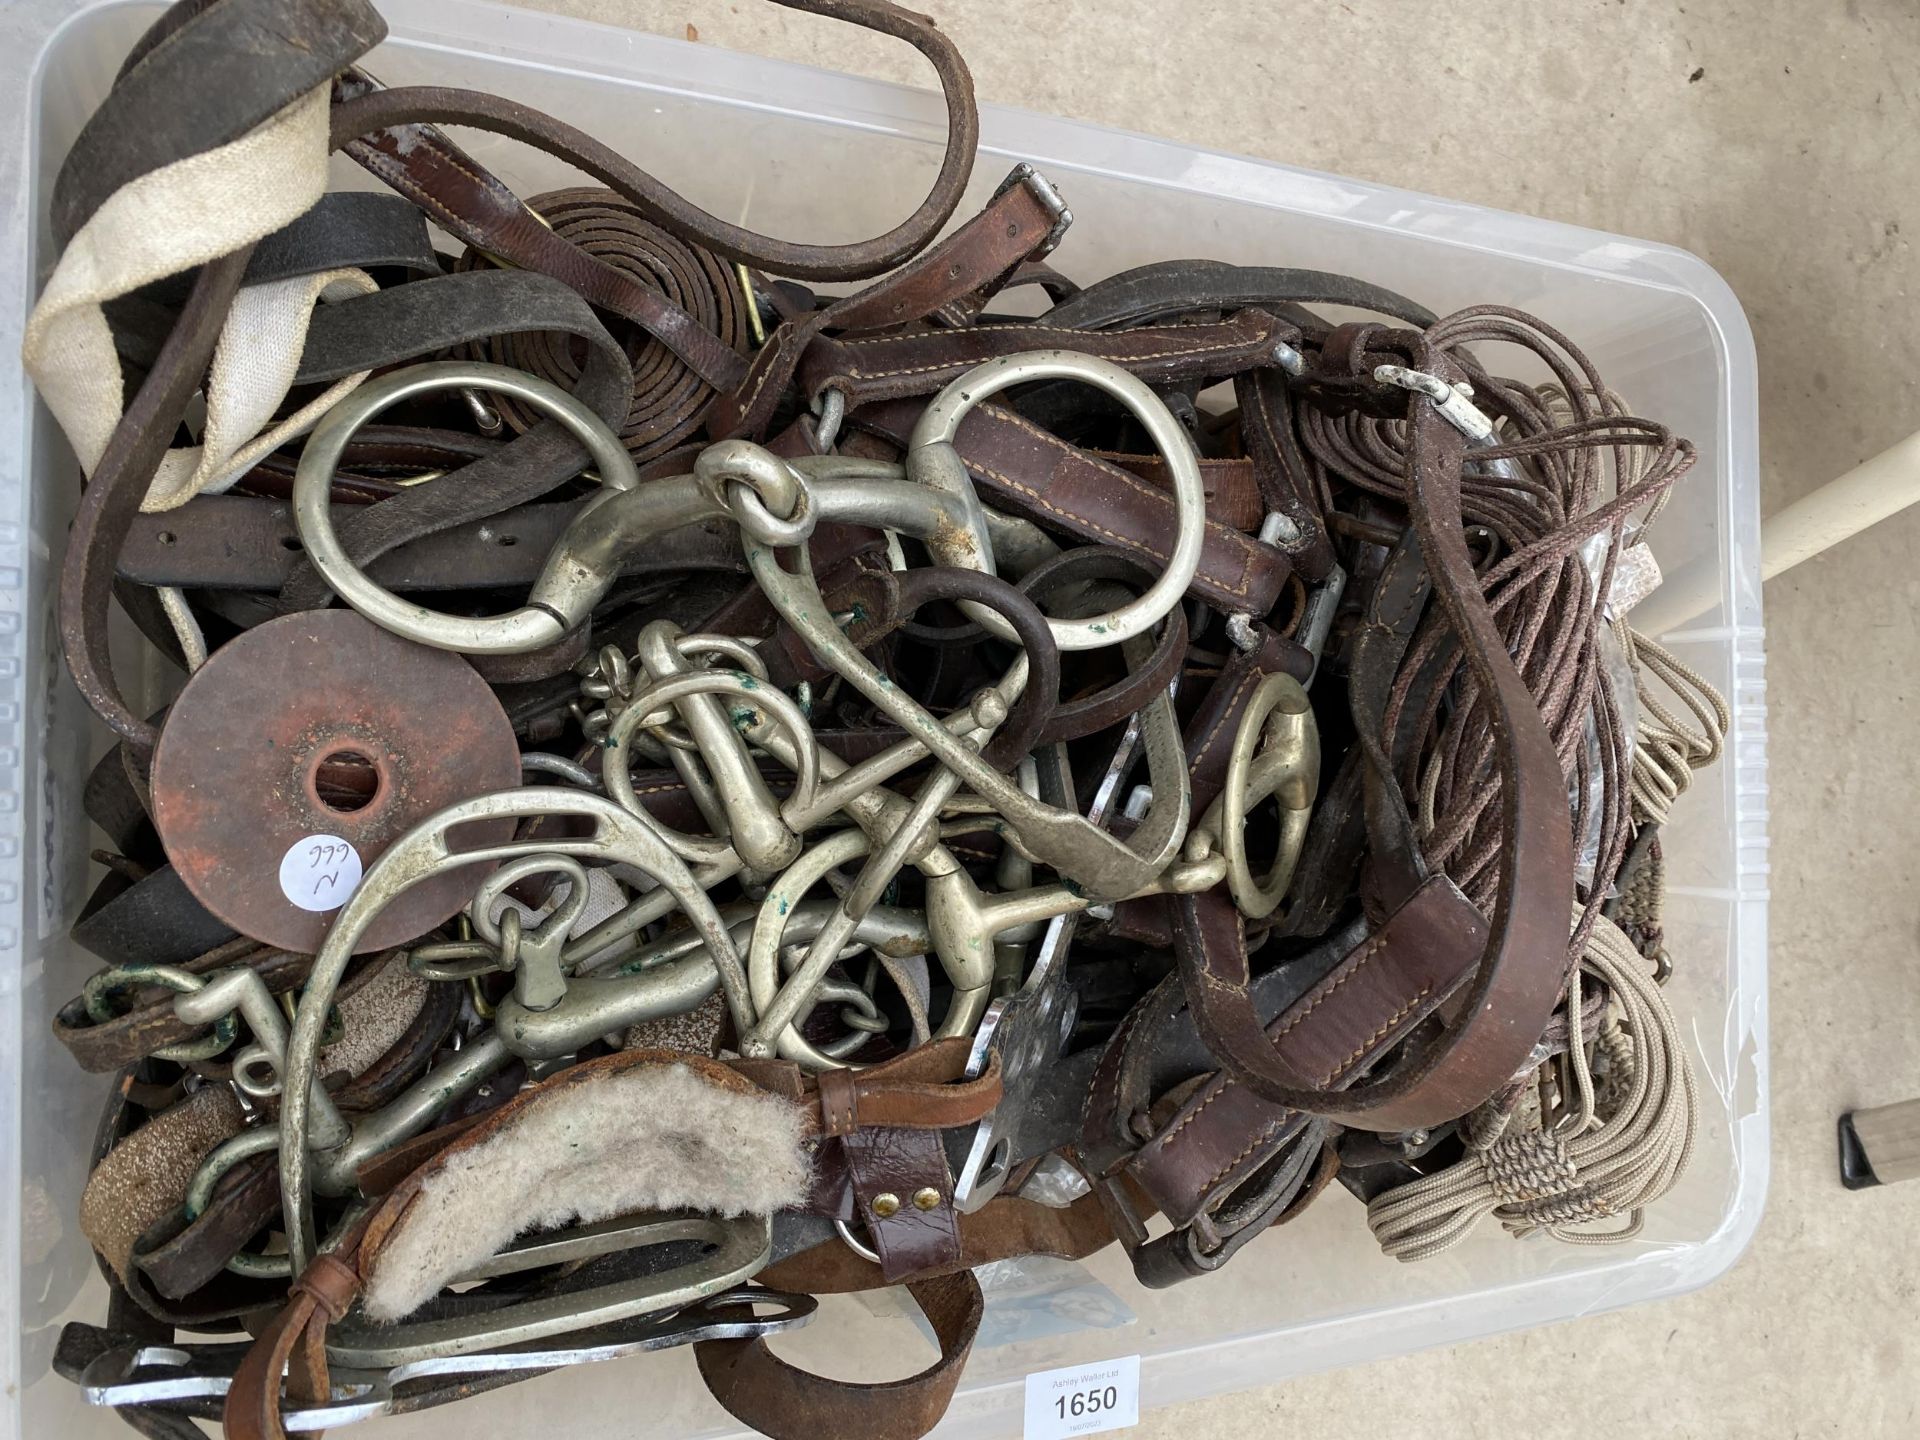 A LARGE ASSORTMENT OF VINTAGE HORSE TACK TO INCLUDE HEAD COLLARS, BITS AND STIRRUPS ETC - Image 2 of 2